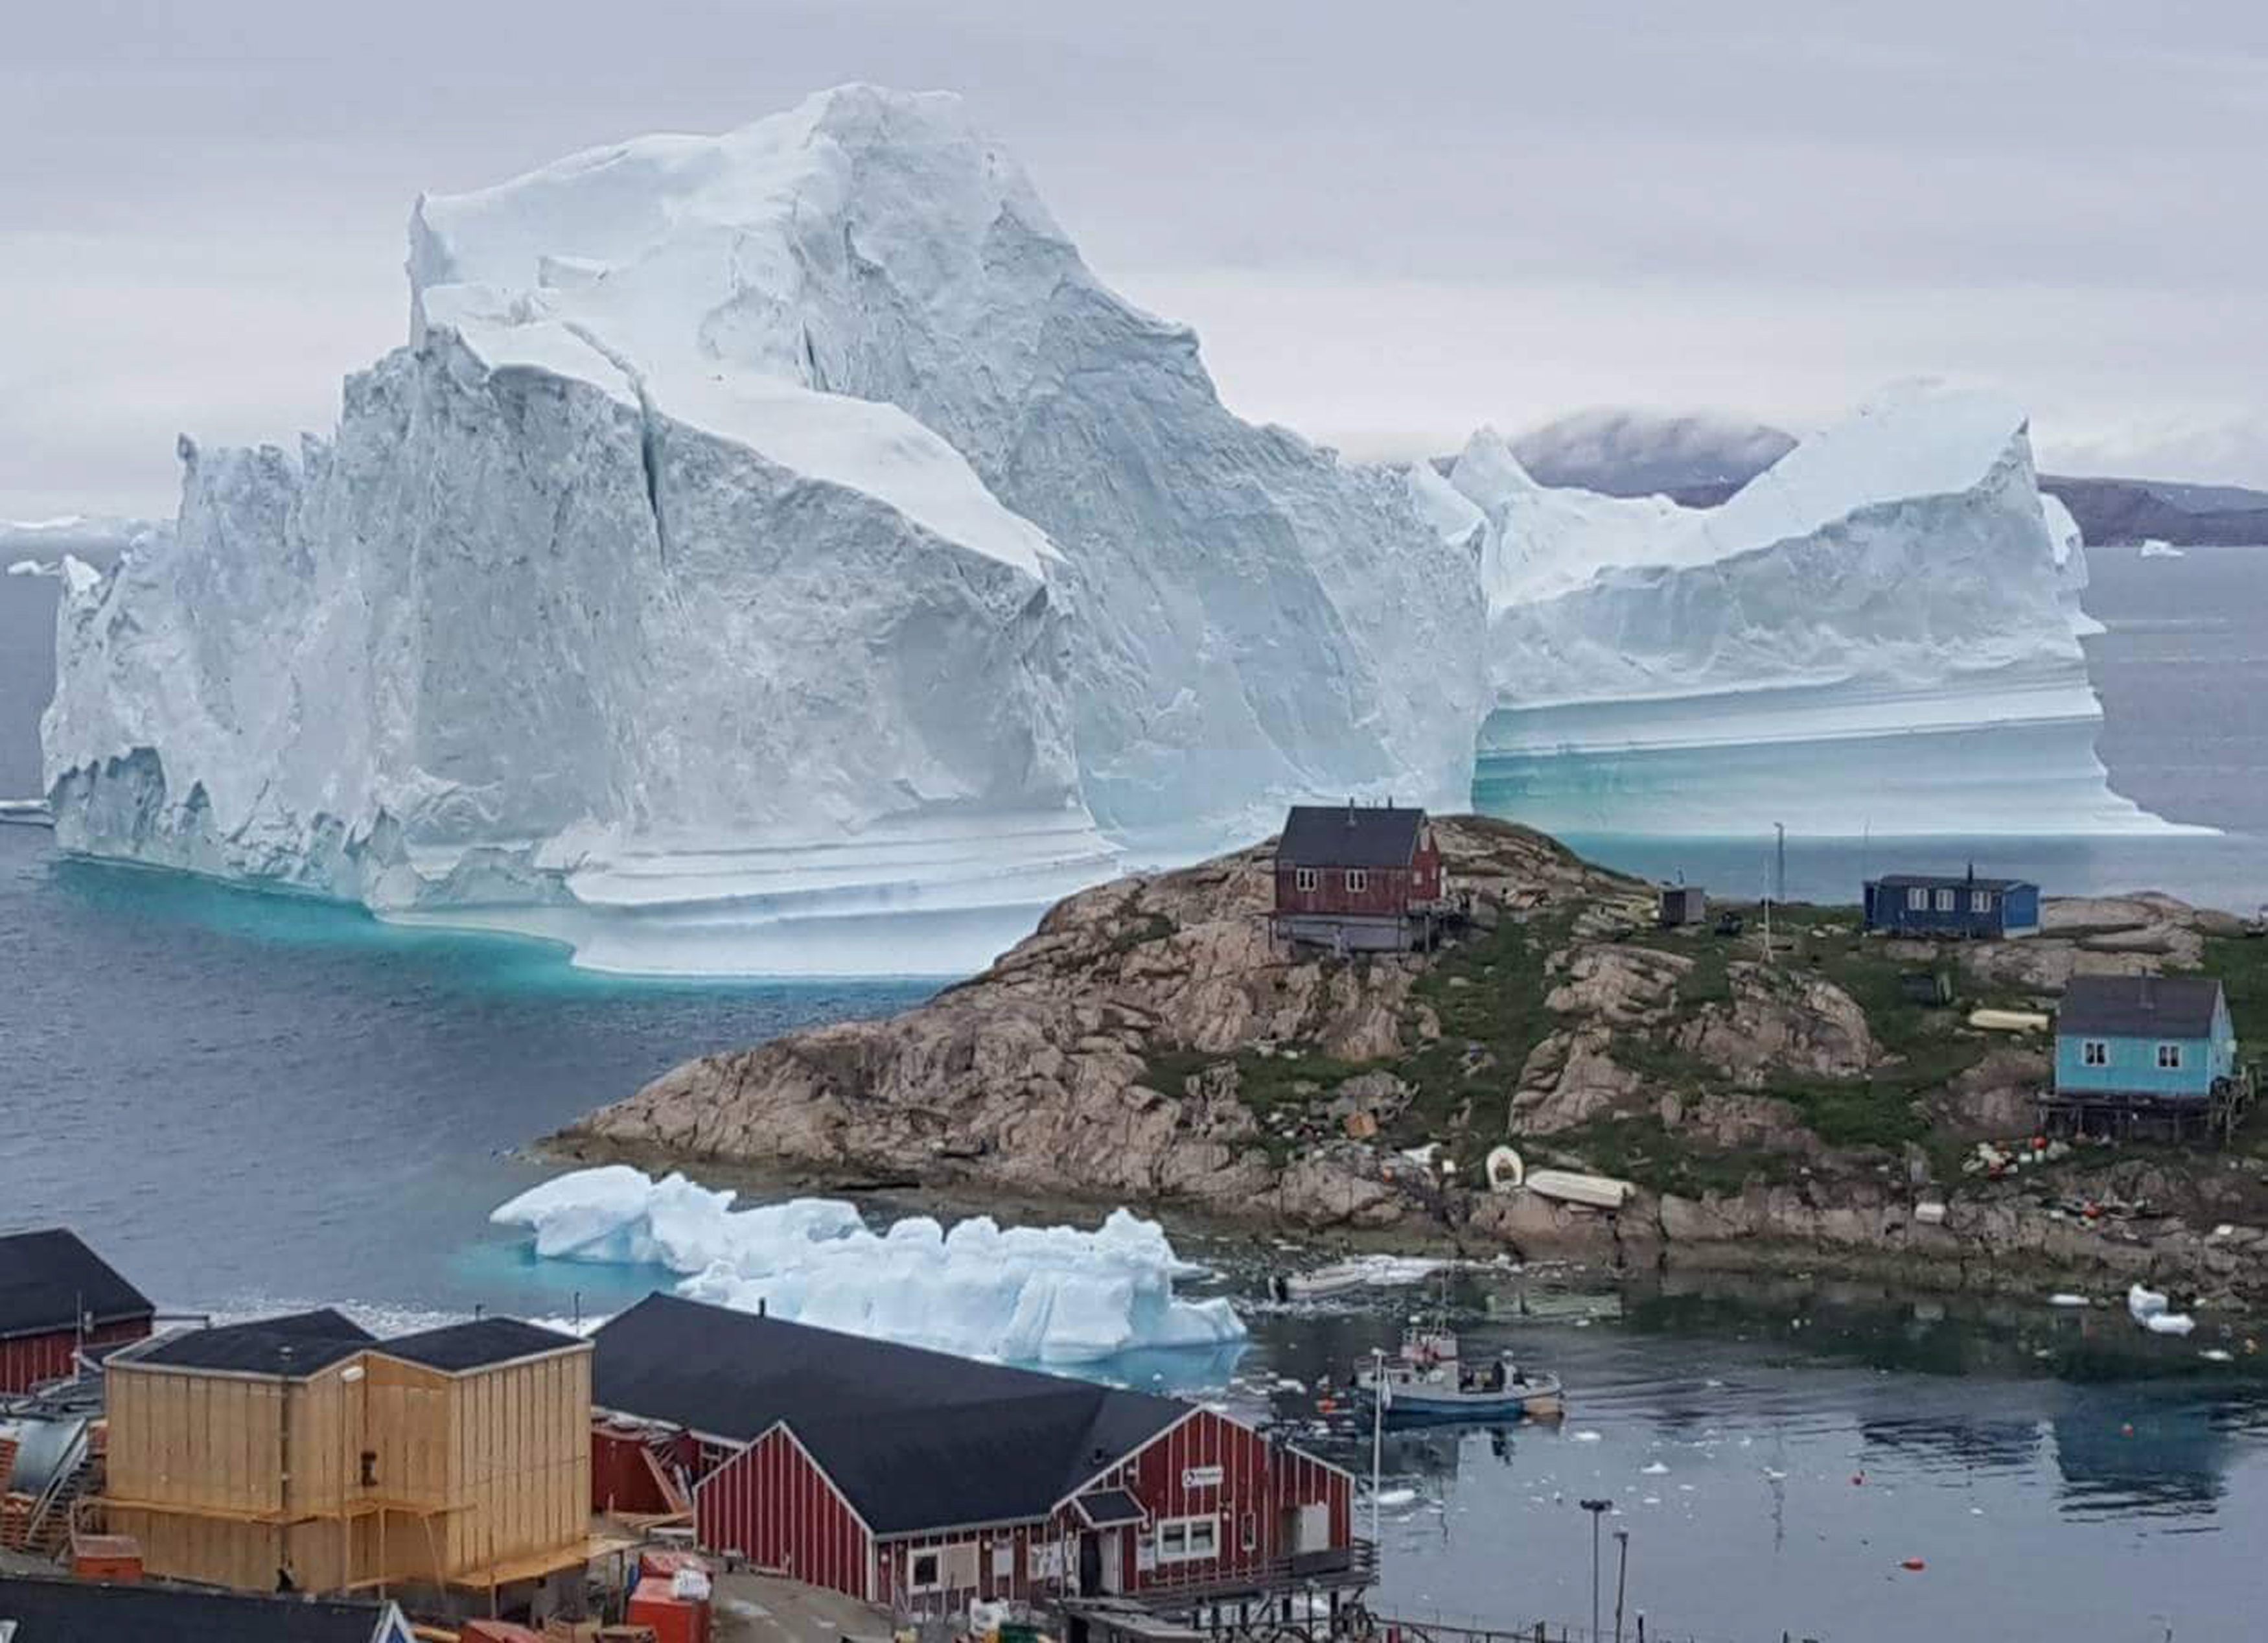 epa06885114 A general view shows an iceberg stranded near the village of Innaarsuit, in the Avannaata Municipality, northwestern Greenland, 12 July 2018 (issued 13 July 2018). The Avannaata Municipality was alarmed on 11 July, after a huge iceberg was grounded just outside the village of Innaarsuit. According to local media, police asked villagers who live closest to the water, to leave their houses over fears the iceberg could calve and affect the village with a tsunami.  EPA/KARL PETERSEN  DENMARK OUT